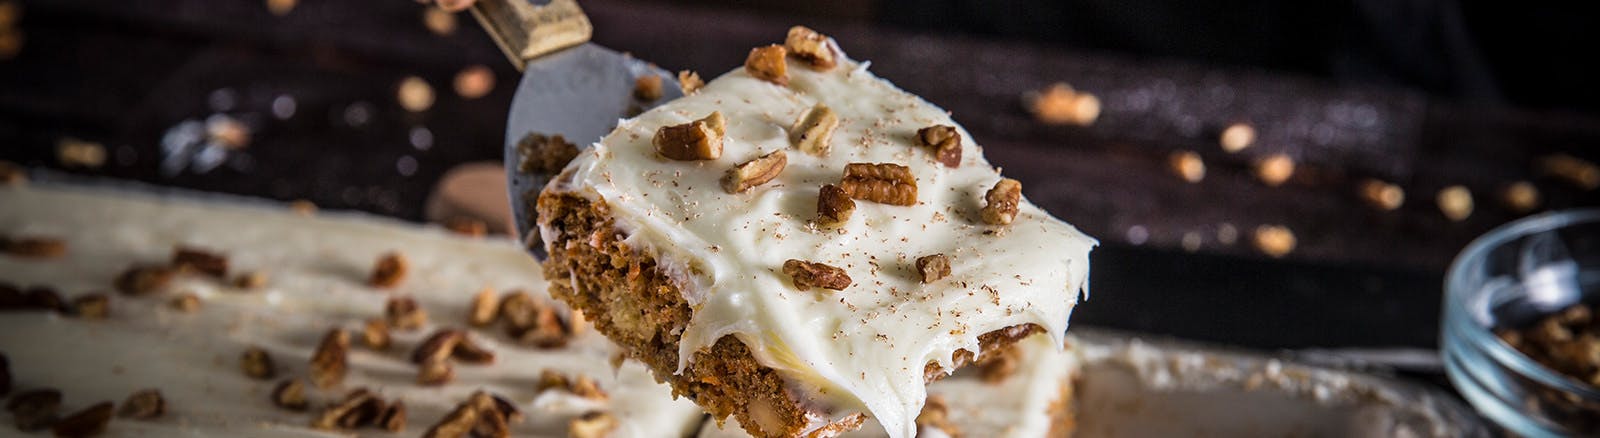 Baked Carrot Sheet Cake With Cream Cheese Frosting